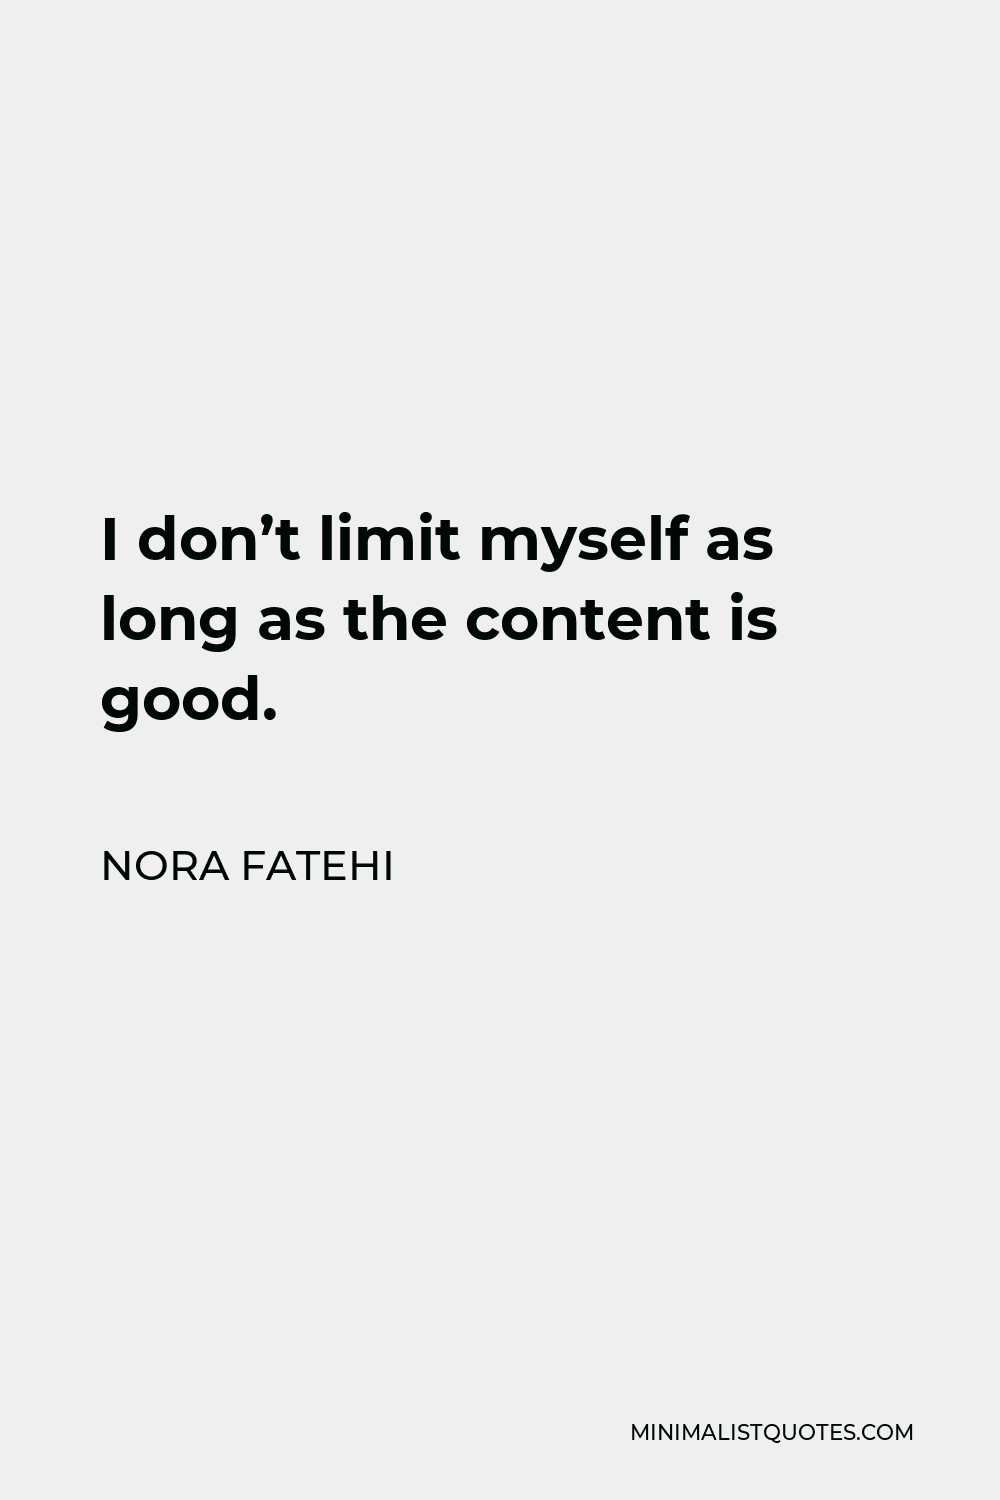 Nora Fatehi Quote - I don’t limit myself as long as the content is good.